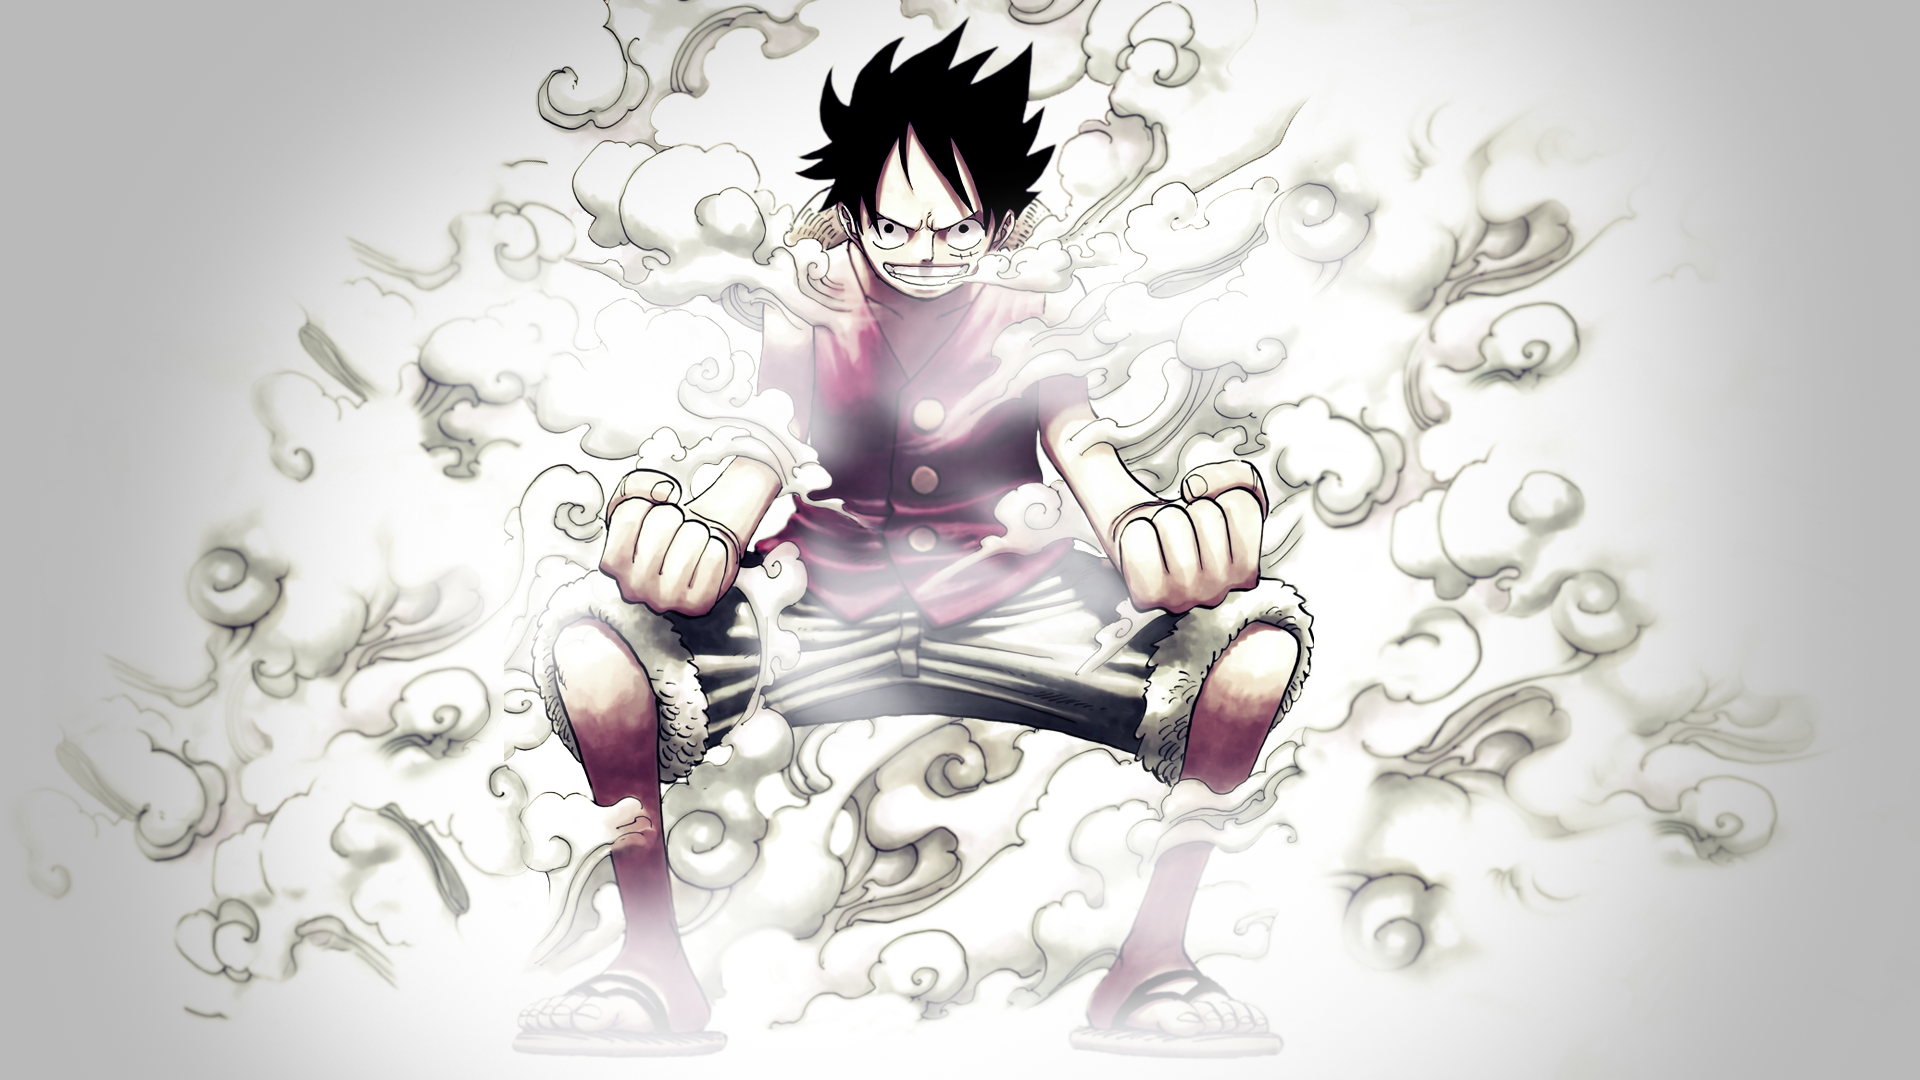 One Piece Luffy Wallpaper Hd Paint - One Piece Wallpaper Luffy Haki -  1920x1080 Wallpaper 